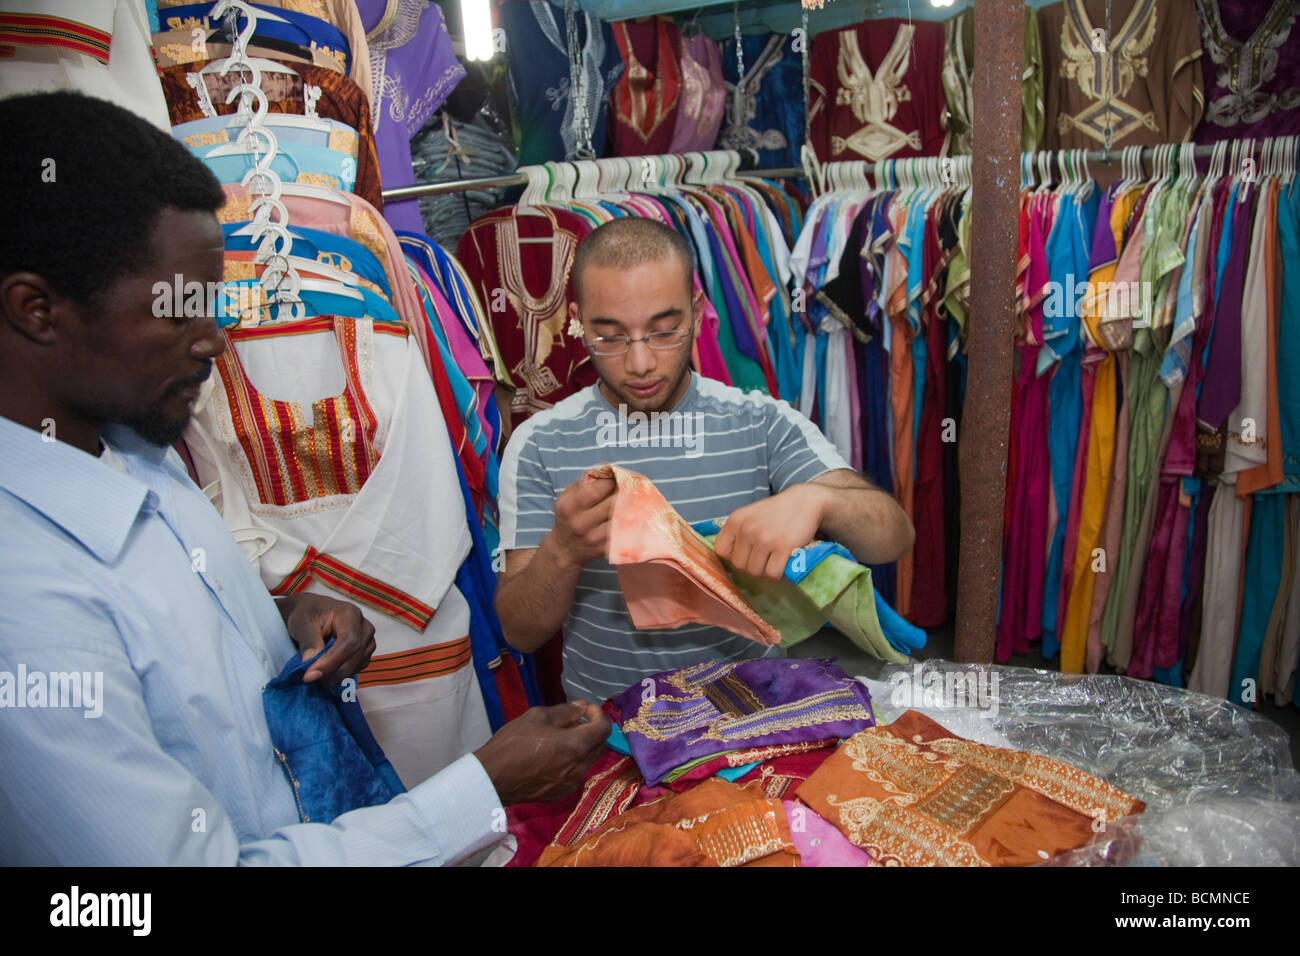 A shopkeeper shows traditional Tunisian clothing to a tourist from the United States in the Medina (old city) in Tunis. Stock Photo